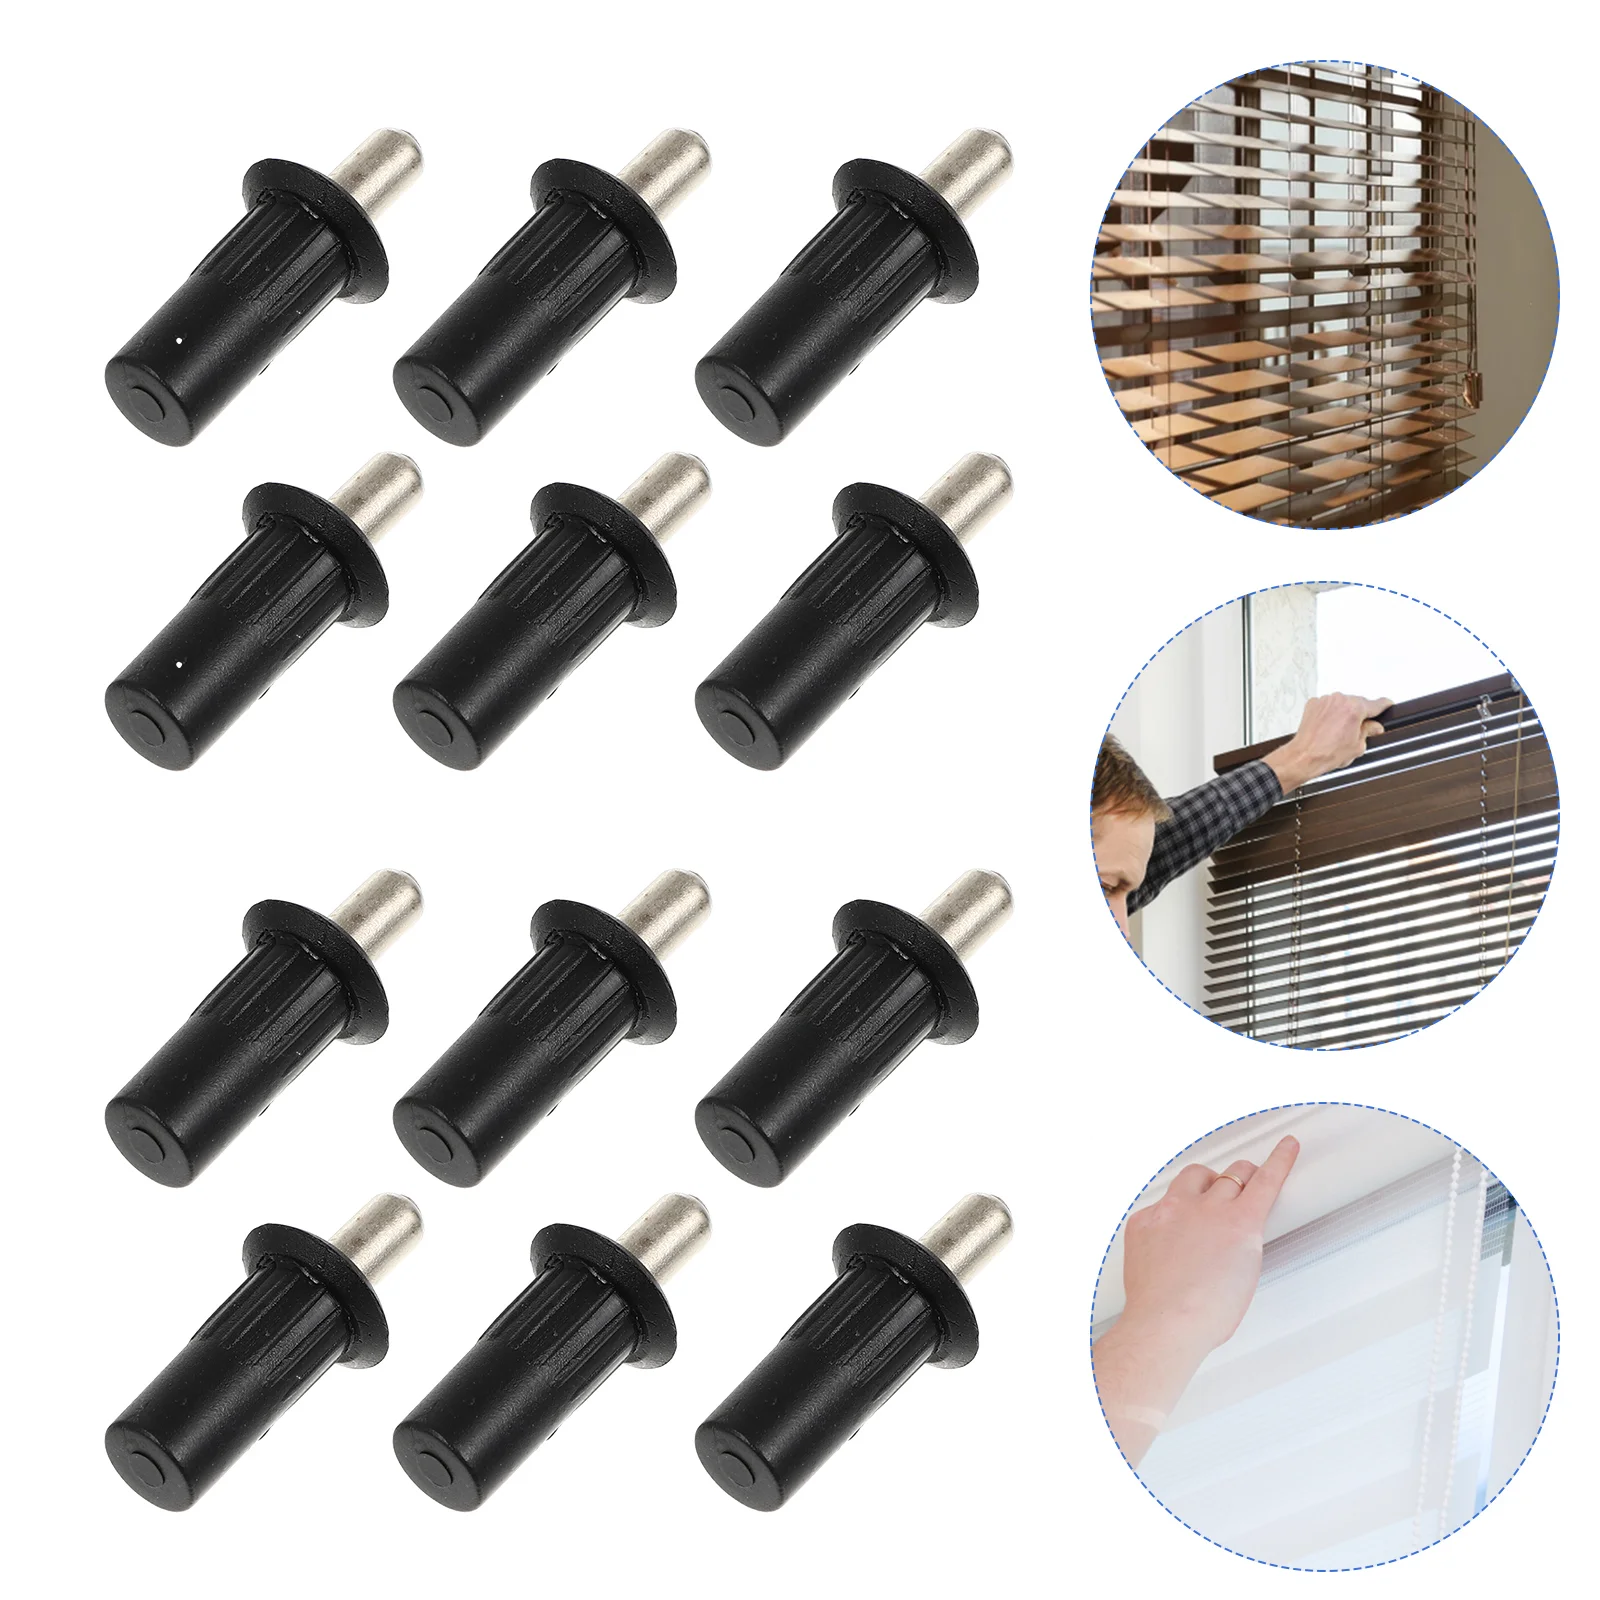 

Shutter Repair Pin Replacement Bolt Plantation Iron Telescopic Shutters Louvers Spring Universal Loaded Window Kit Parts Blinds